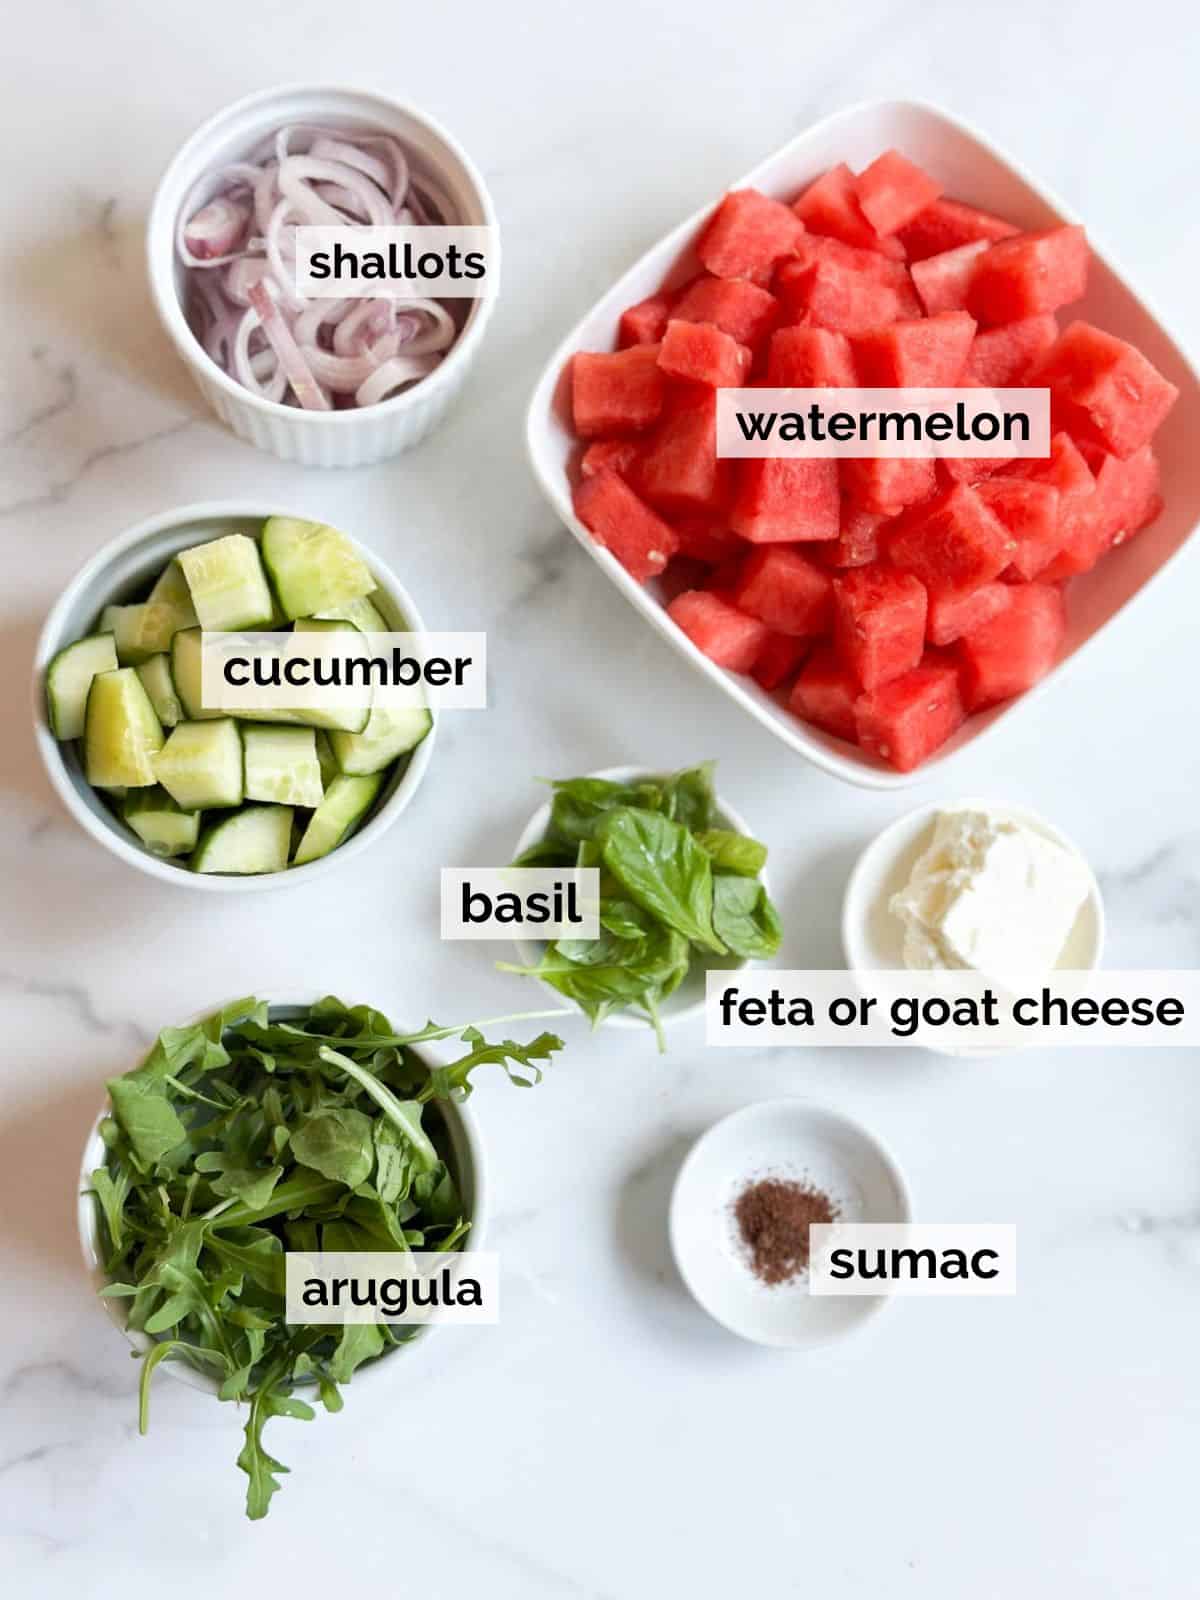 Ingredients for watermelon basil salad on a marble table.